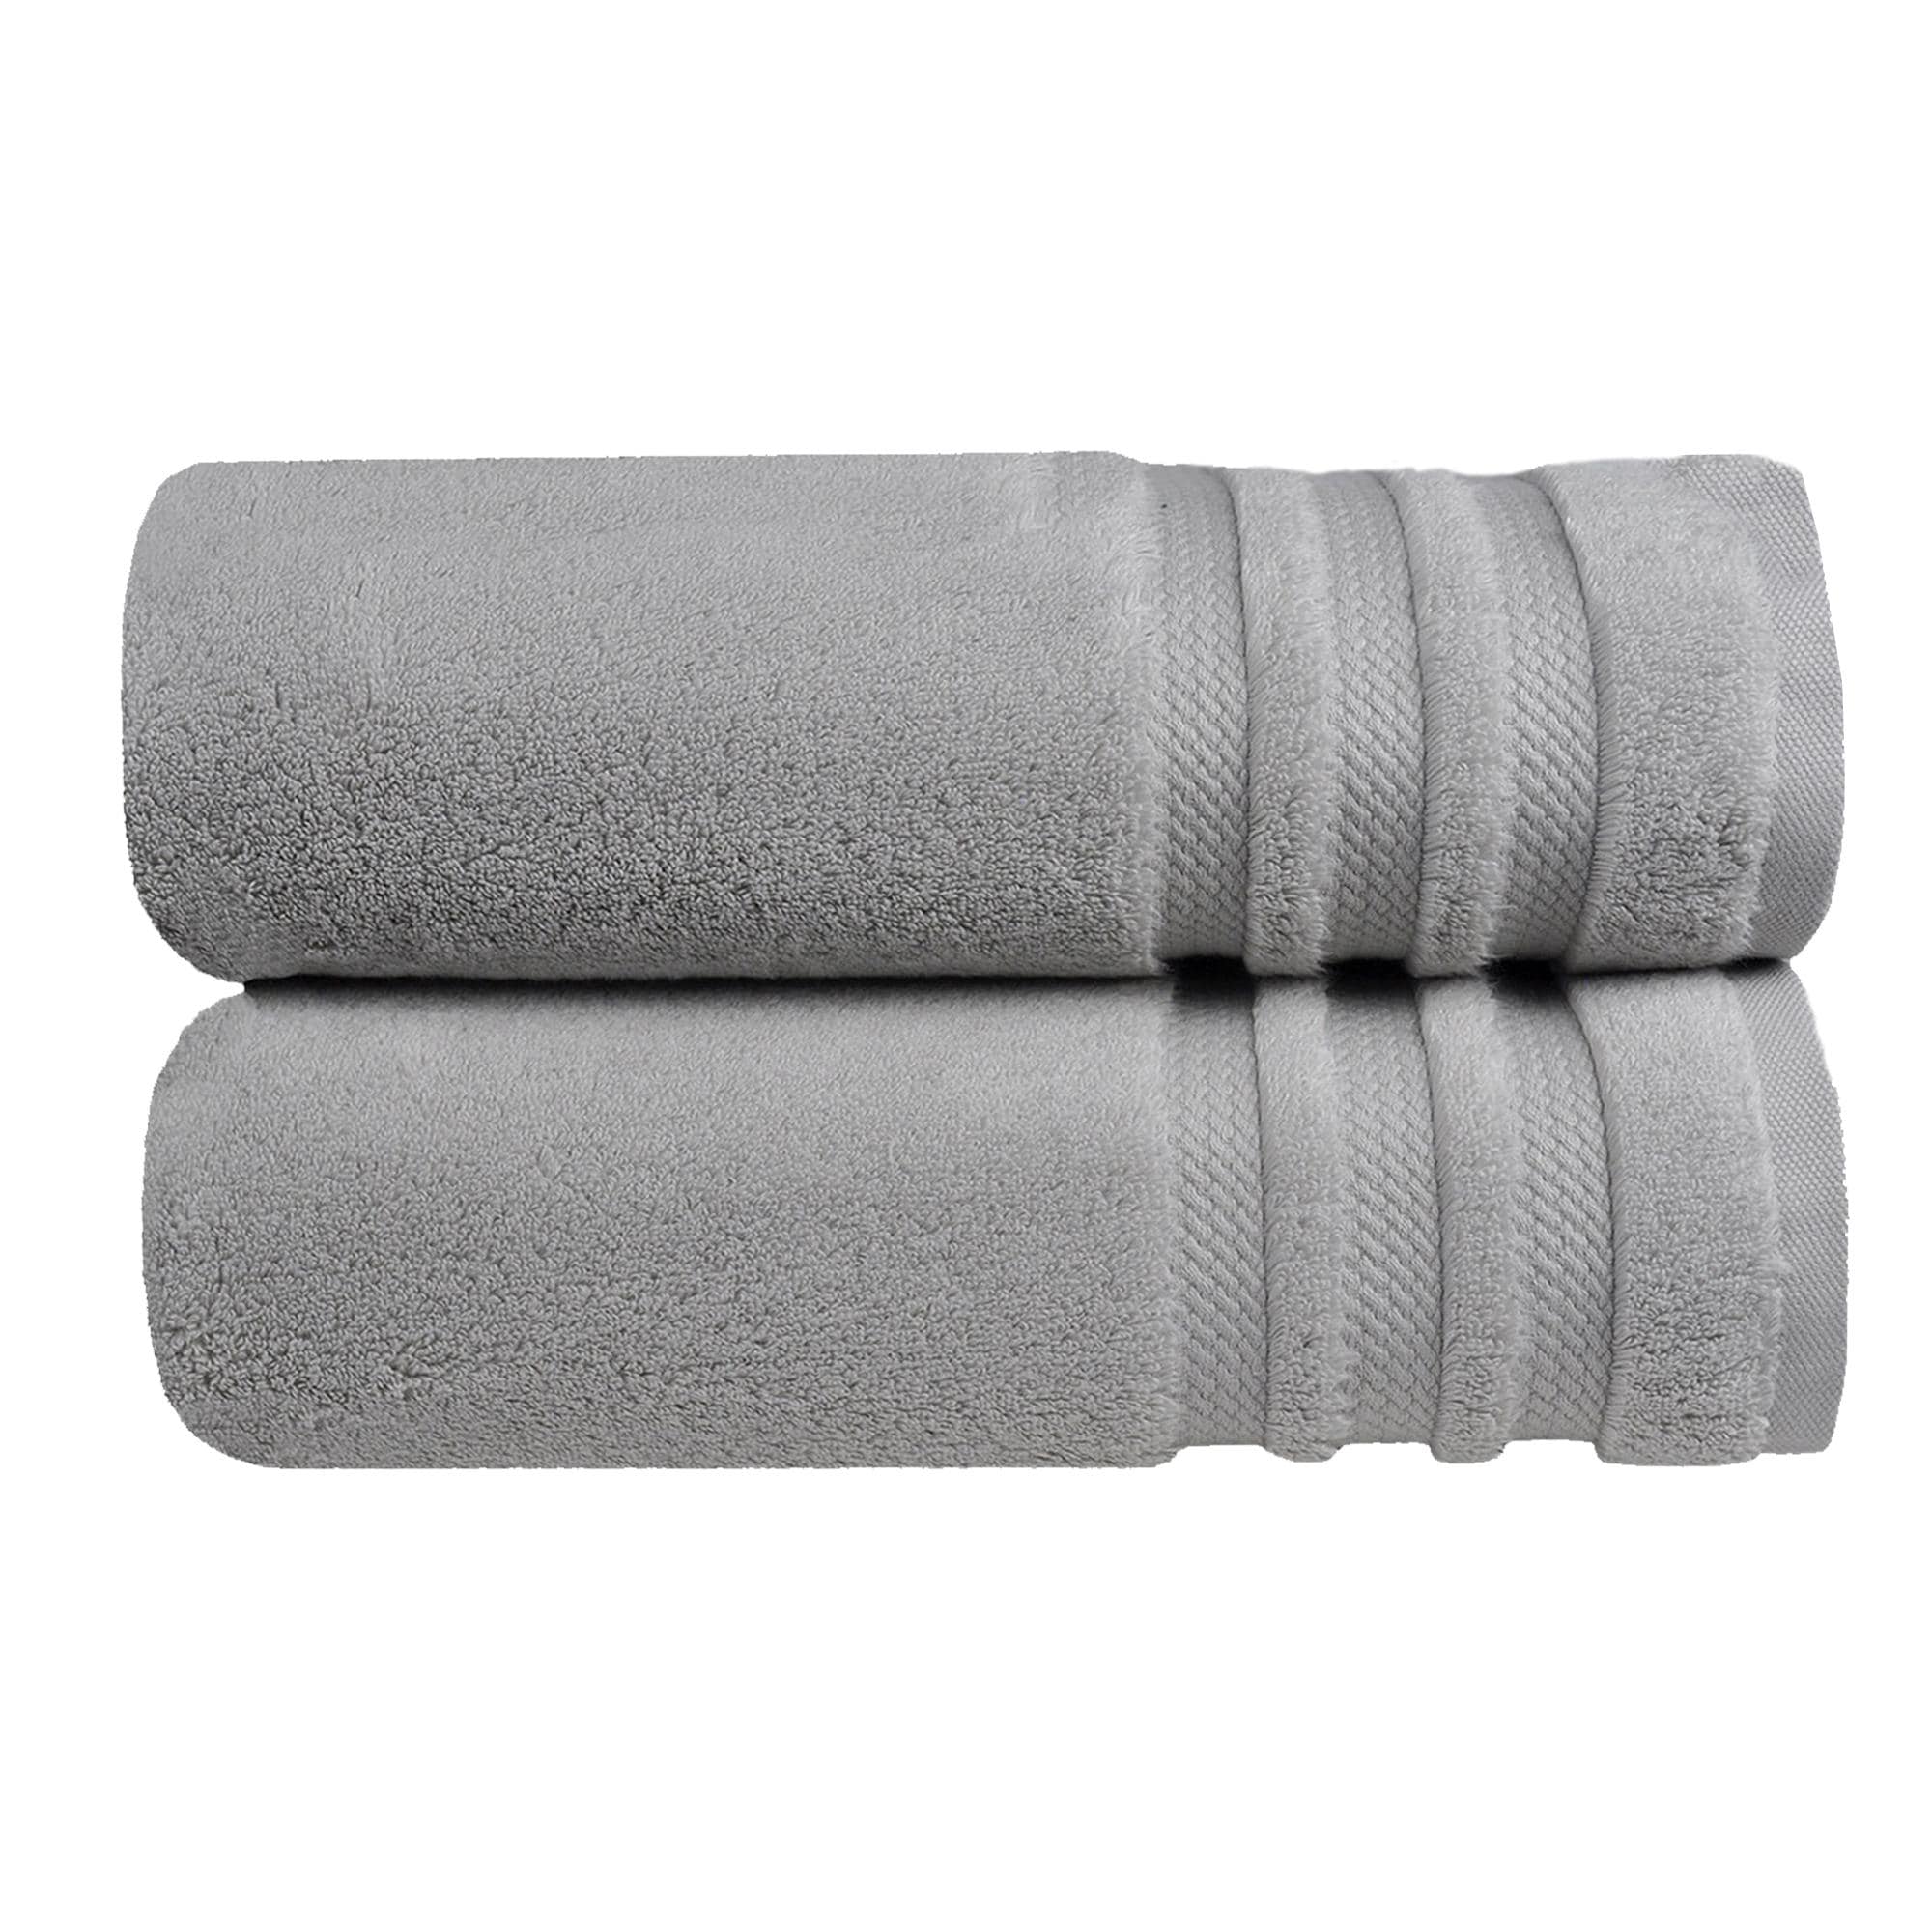 625 GSM Bathroom Towels 6 Piece Towel Set Super Soft 100% Cotton Highly Absorbent Navy TRIDENT Luxury Hotel Collection